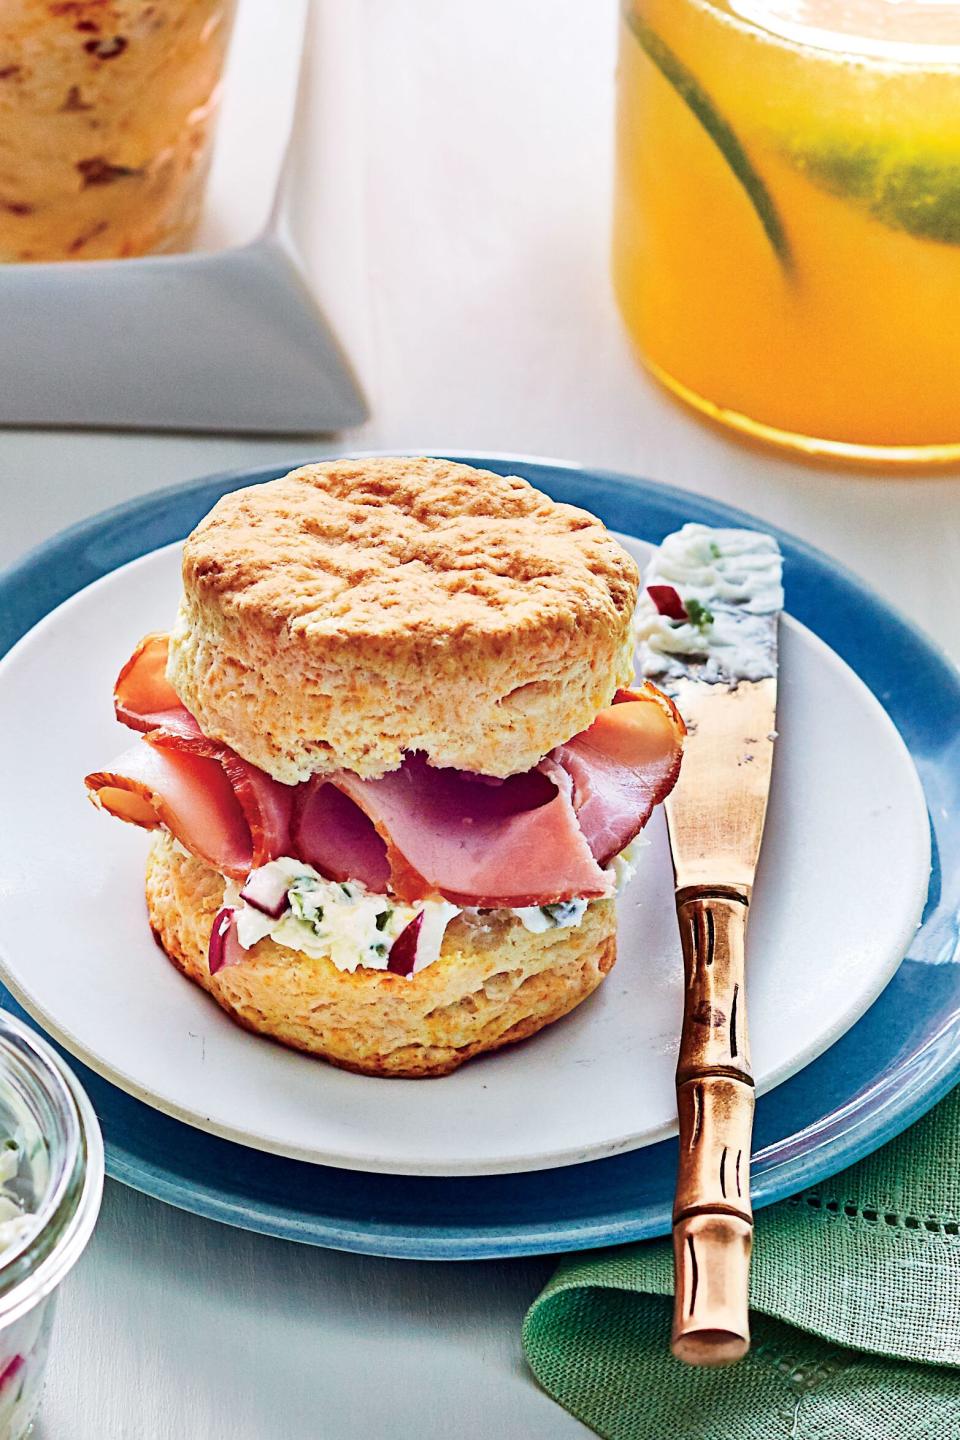 How to Make Your Best Biscuits Yet